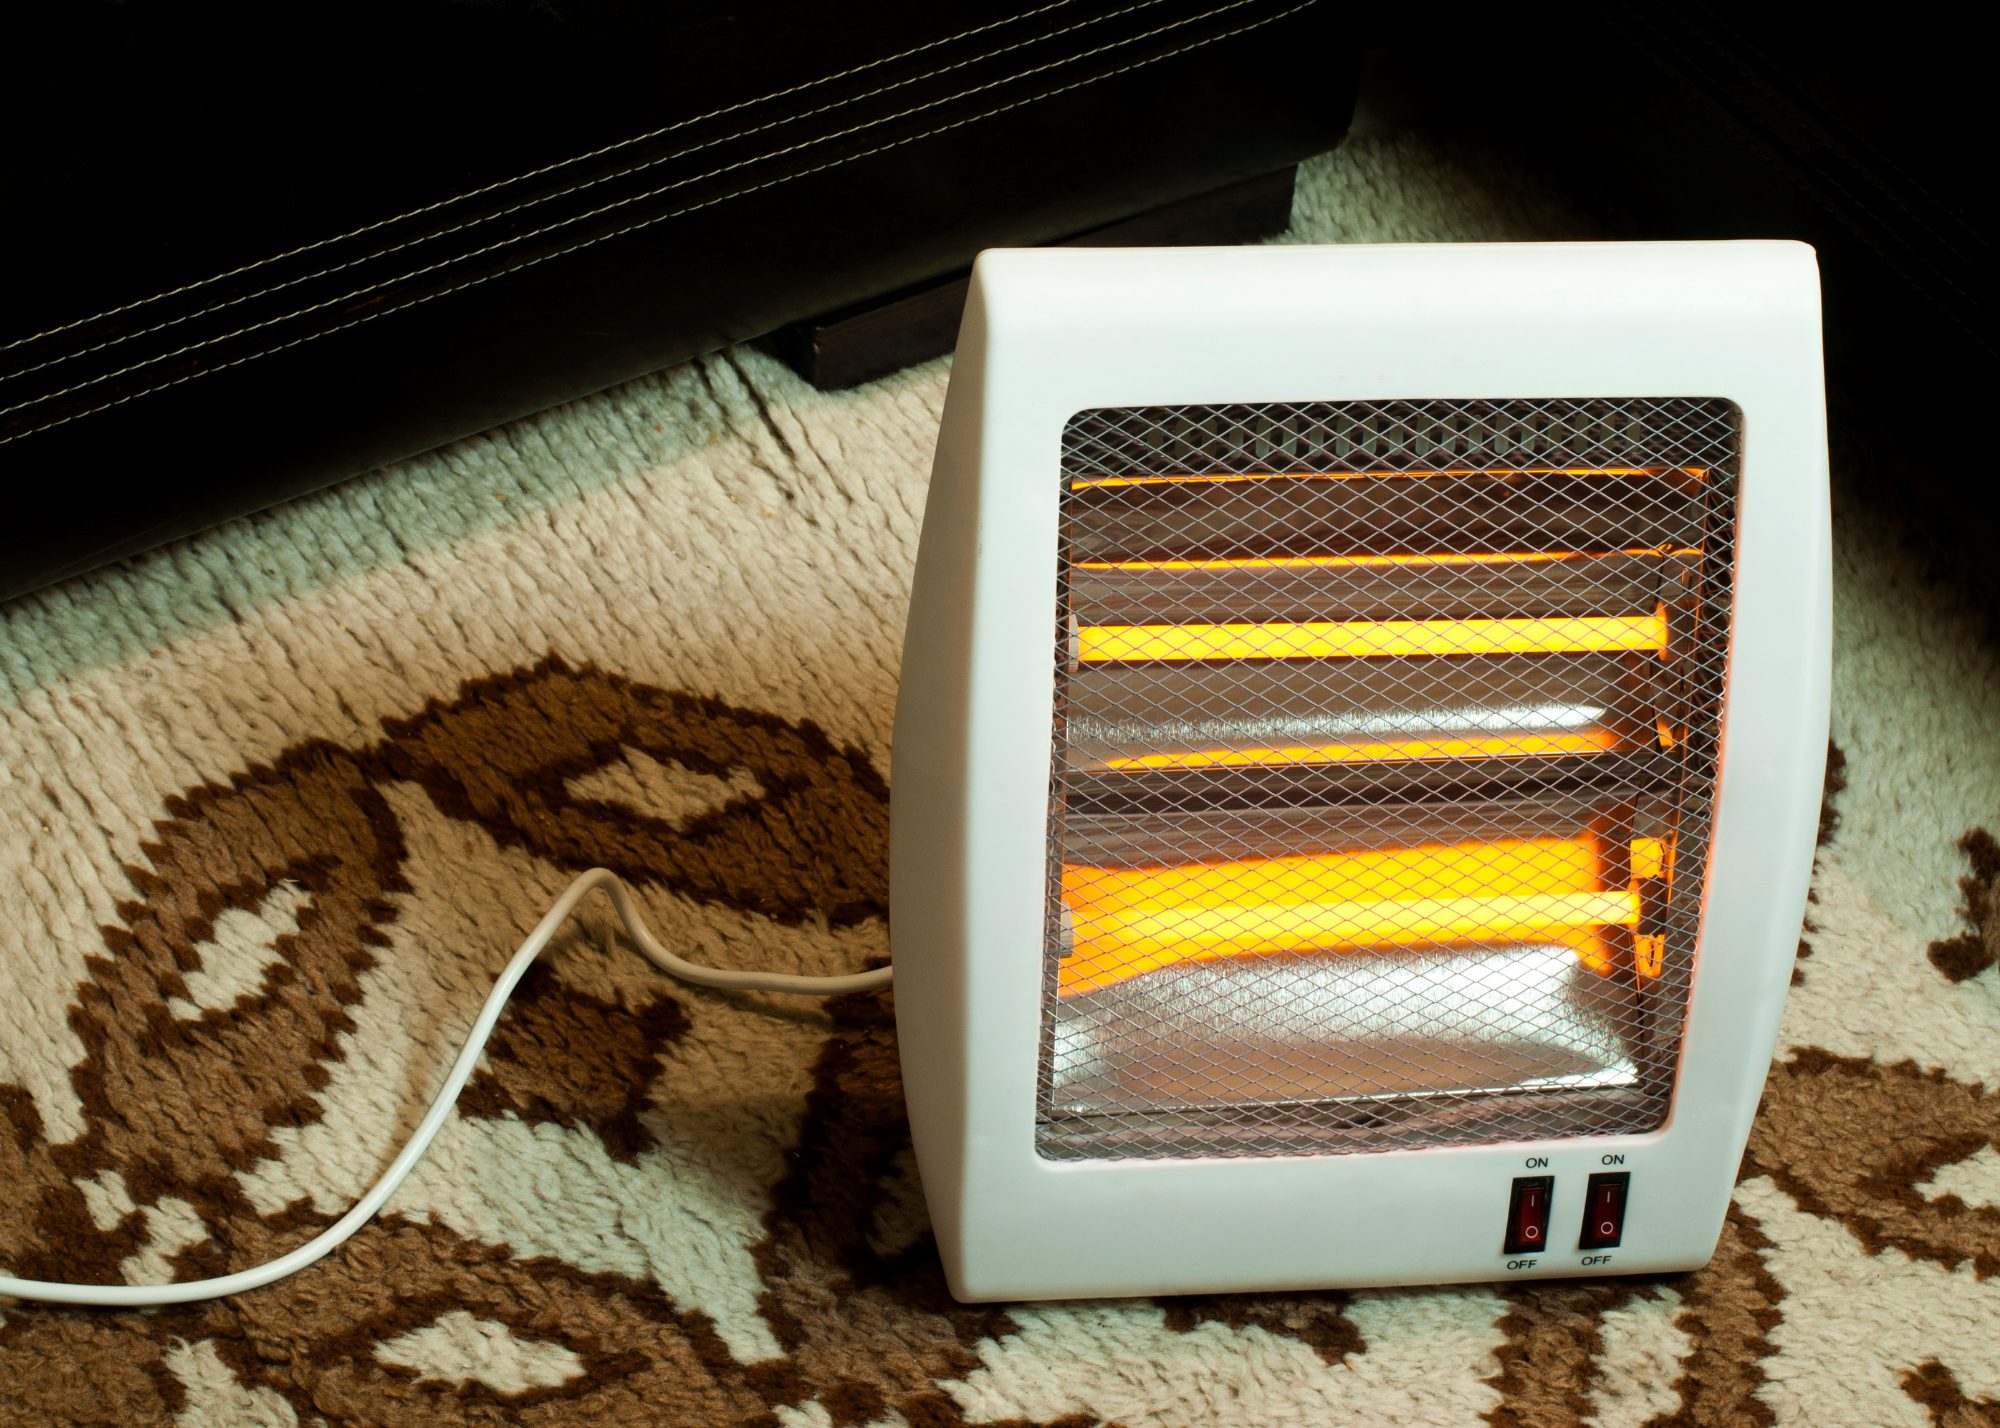 Cheapest Electric Heaters